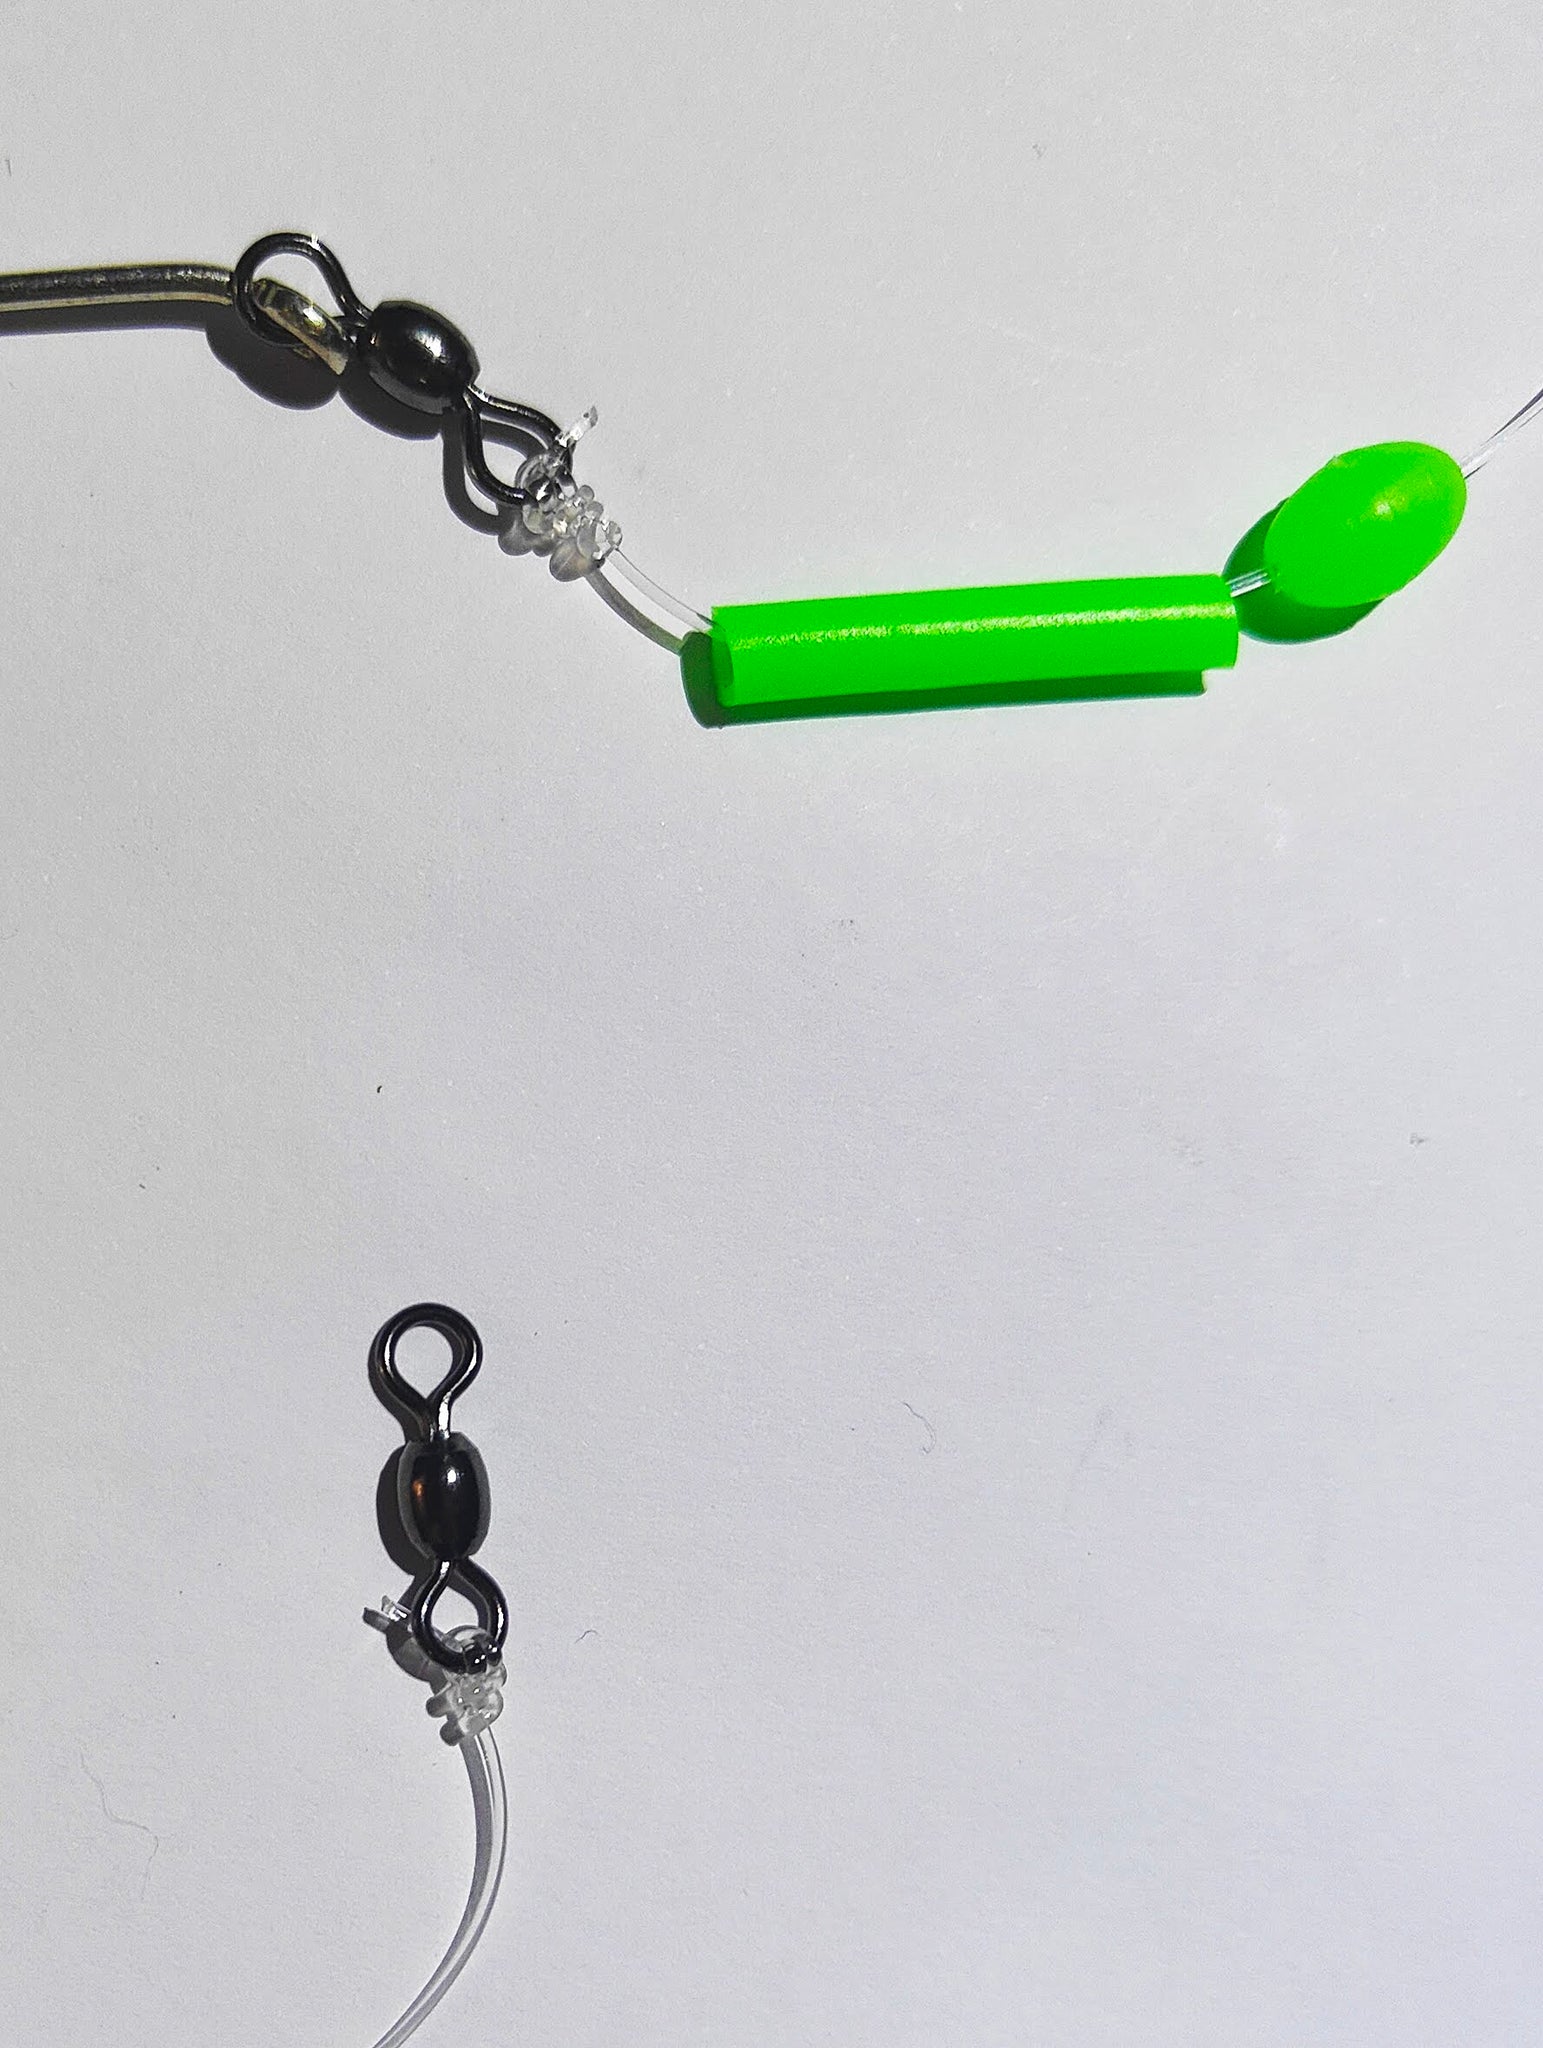 5 x 6/0 80lb Sliding gang rigs with green luminescent tubing